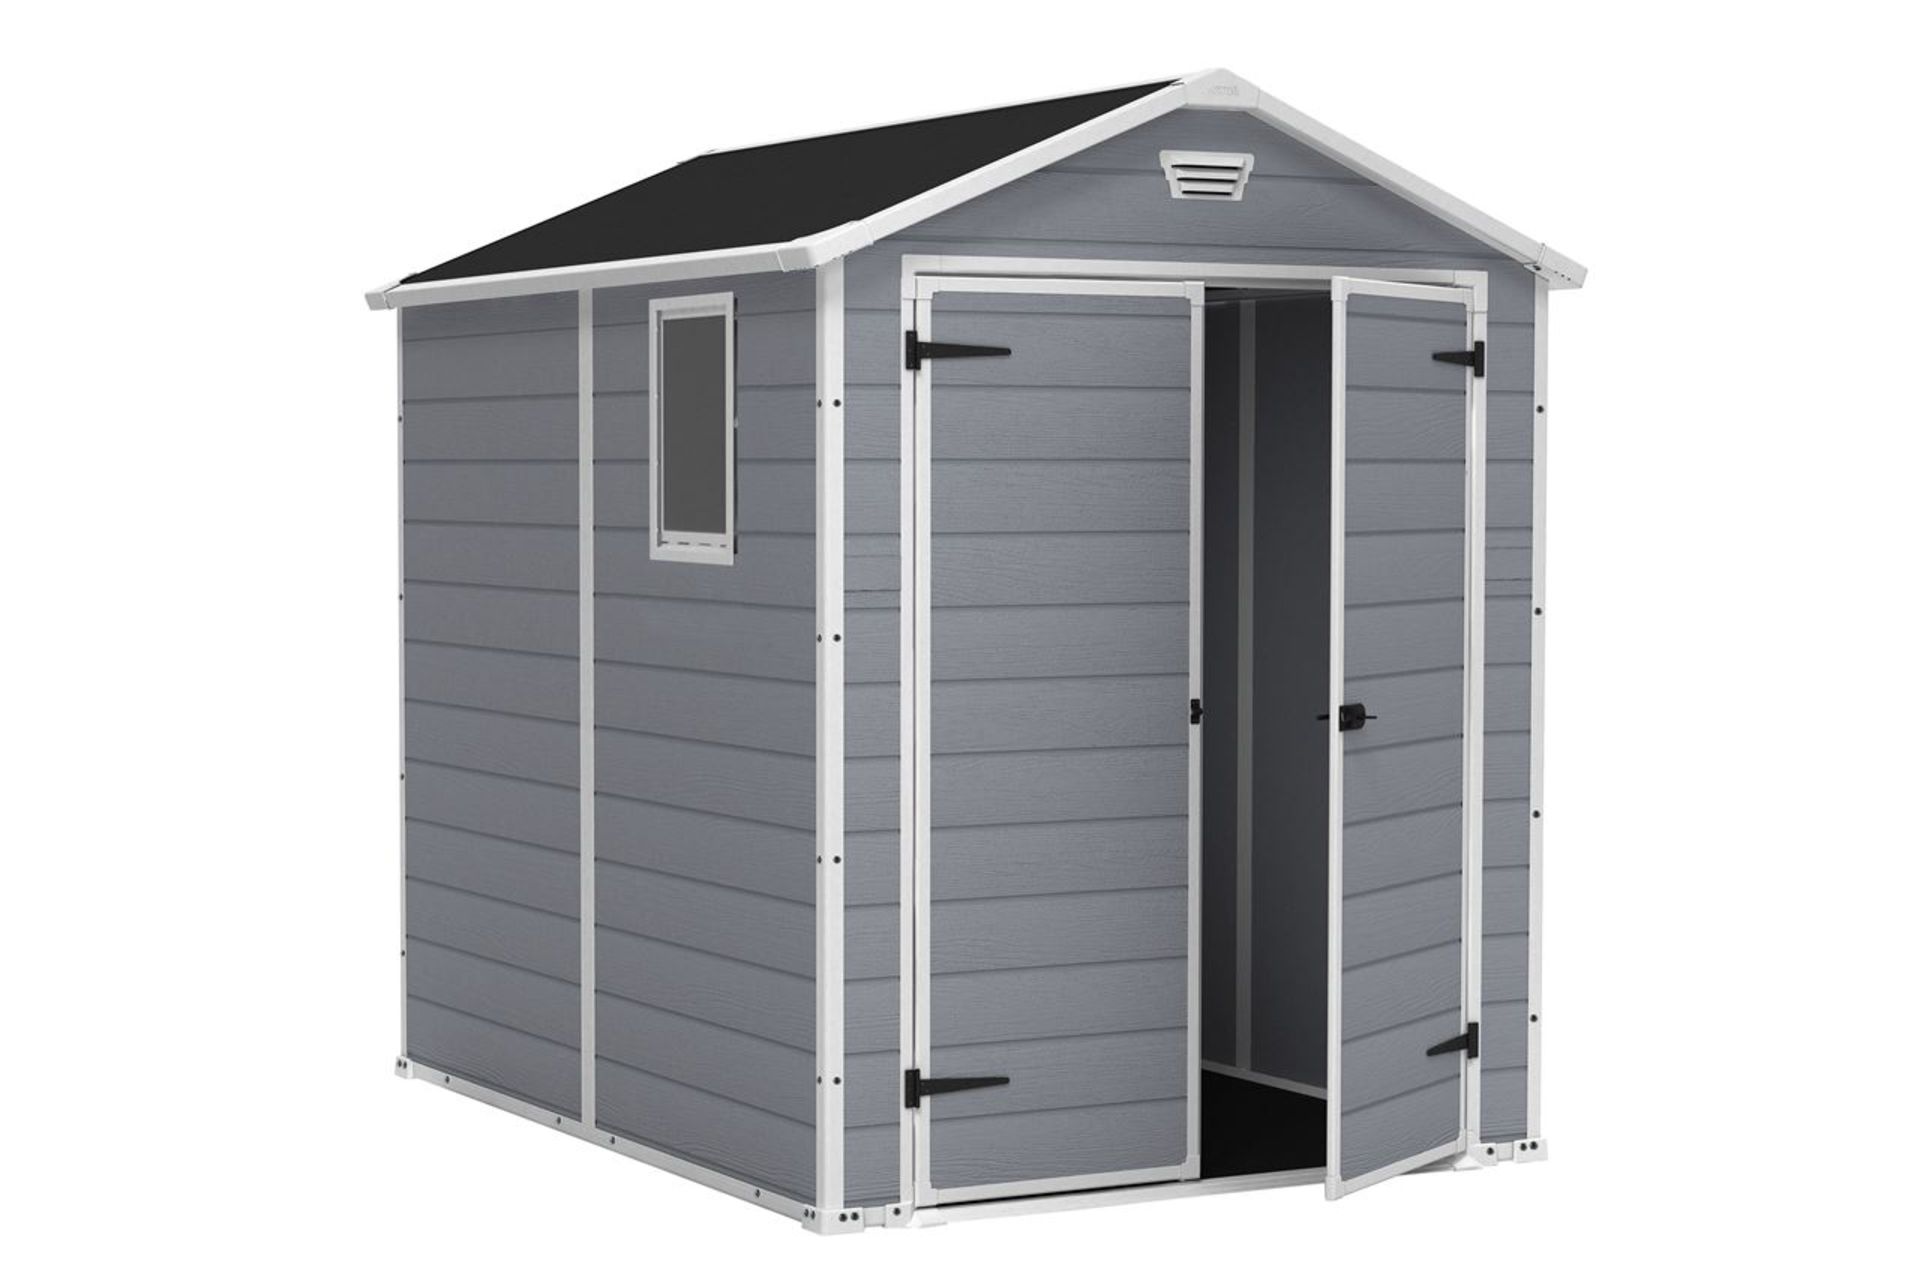 Keter Manor 6 x 8DD Outdoor Shed RRP £550 - Image 4 of 4